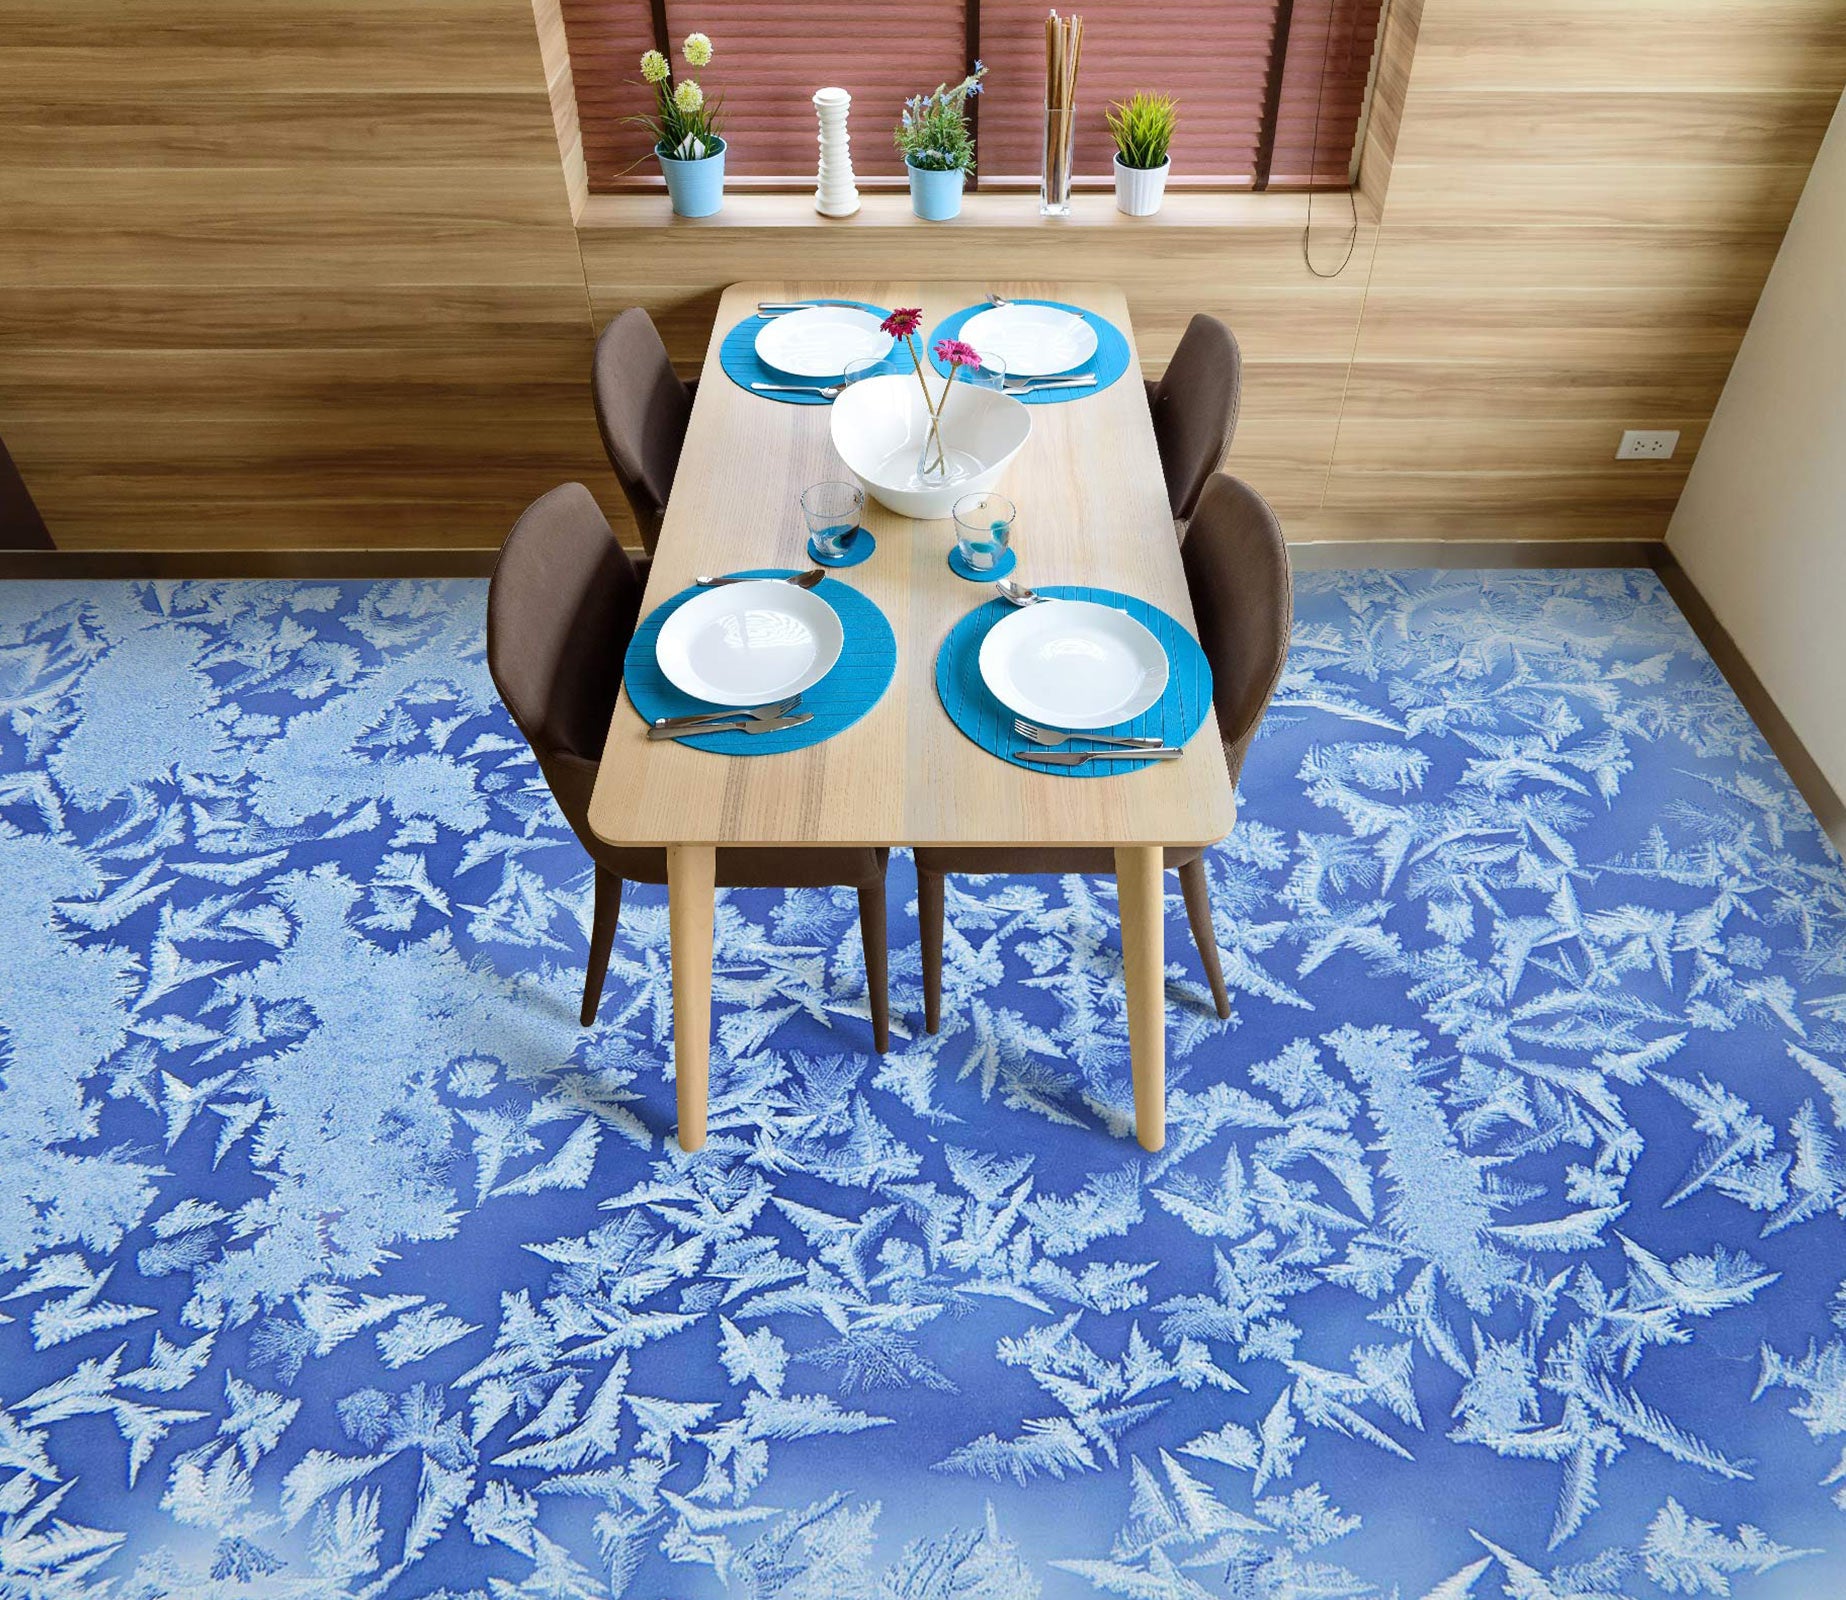 3D Tranquil Blue Leaves 1364 Floor Mural  Wallpaper Murals Self-Adhesive Removable Print Epoxy